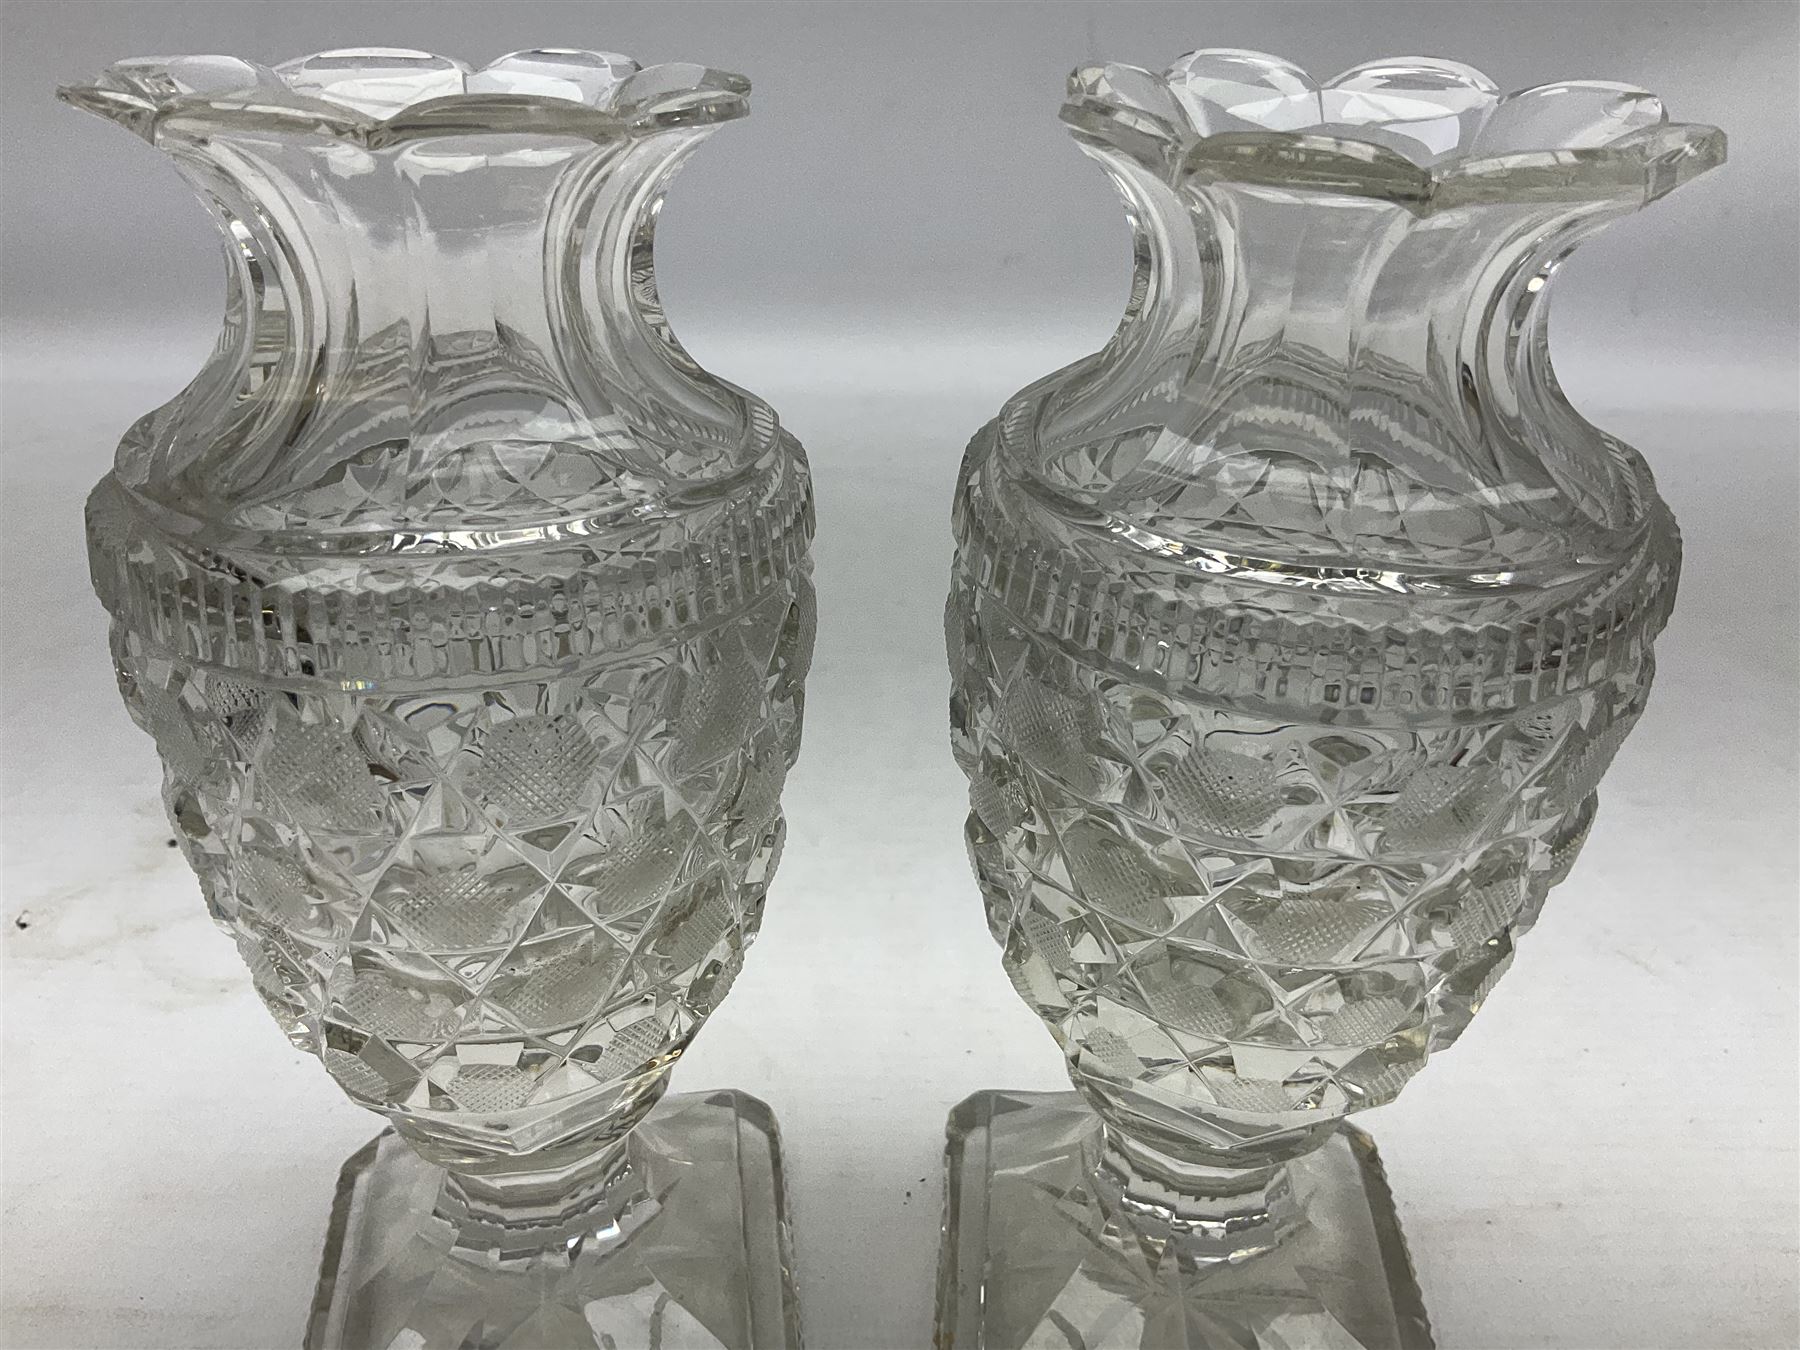 Pair of early 19th century heavy cut glass vases - Image 3 of 6